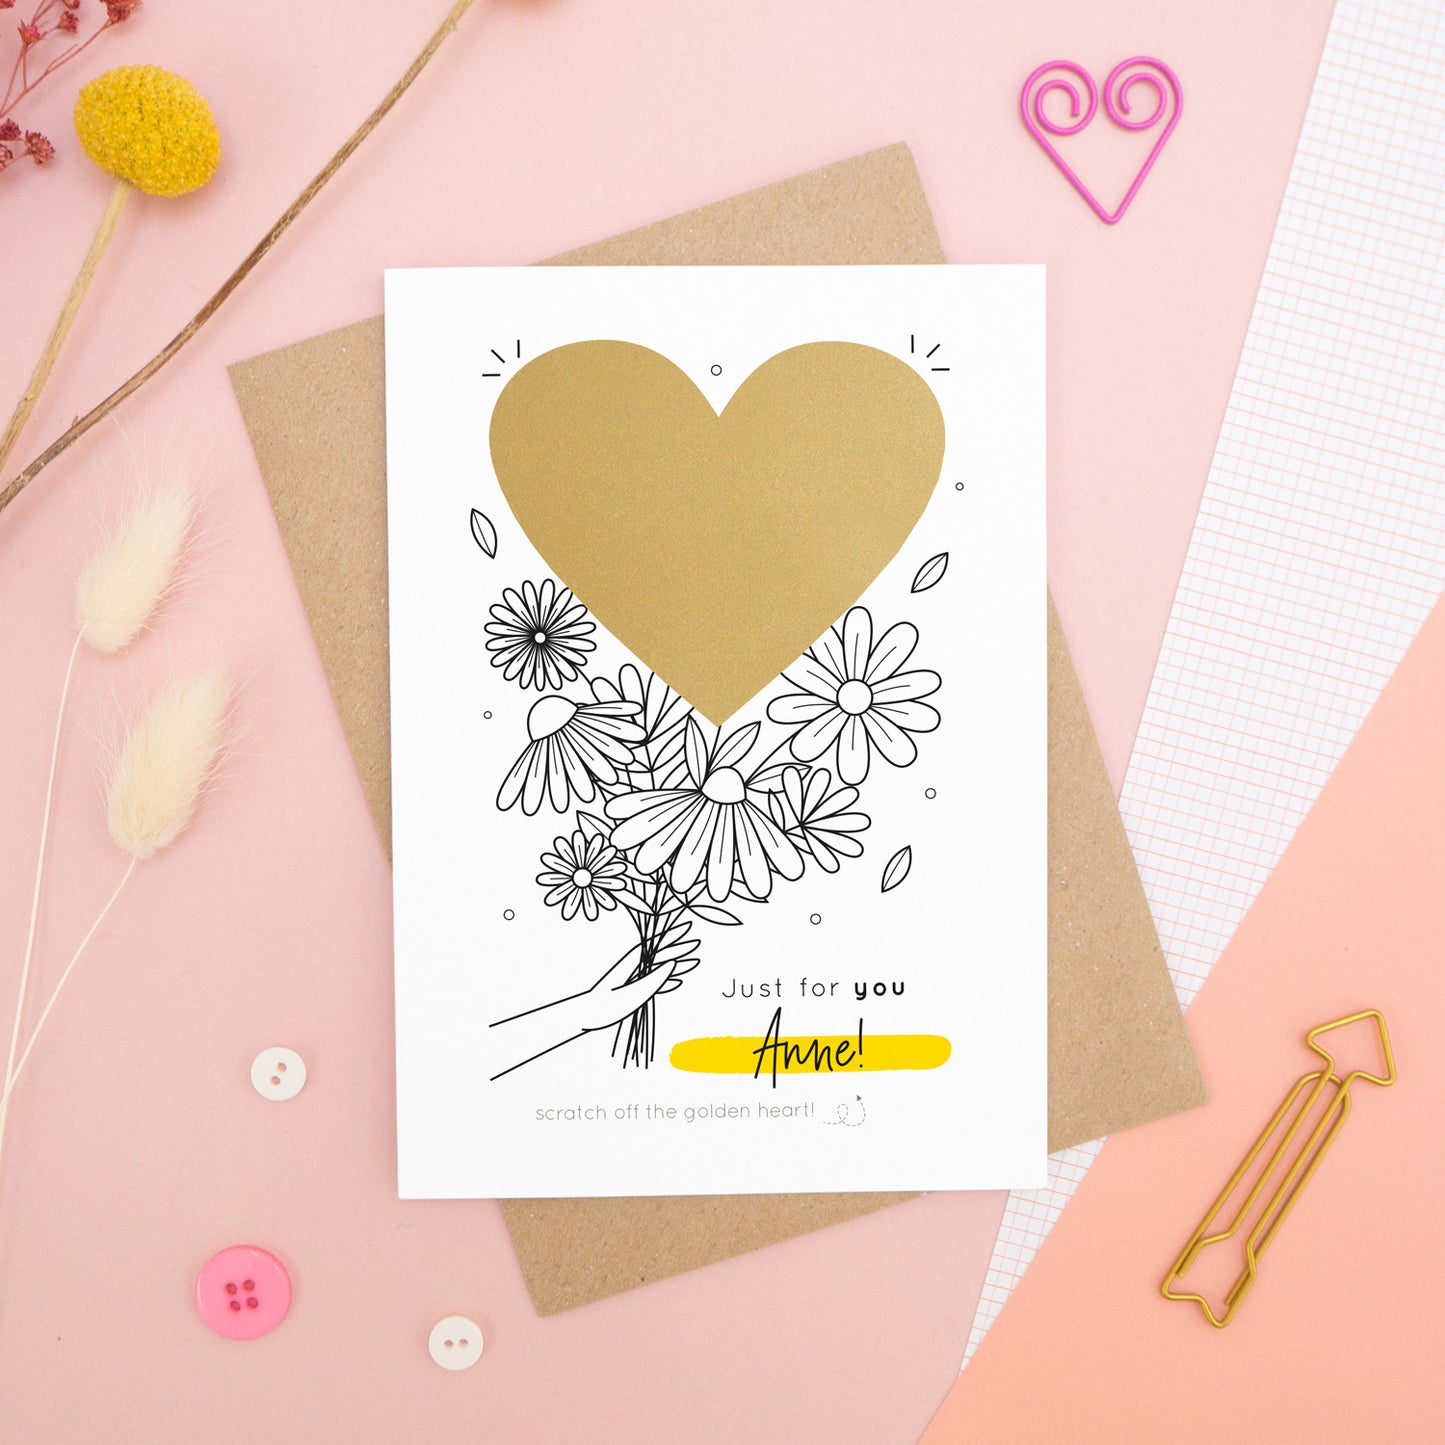 A personalised flower bouquet scratch card photographed on a pink background with floral props, paper clips, and buttons. This card shows a black and white floral illustration and the golden heart before it is scratched off to reveal the secret message!